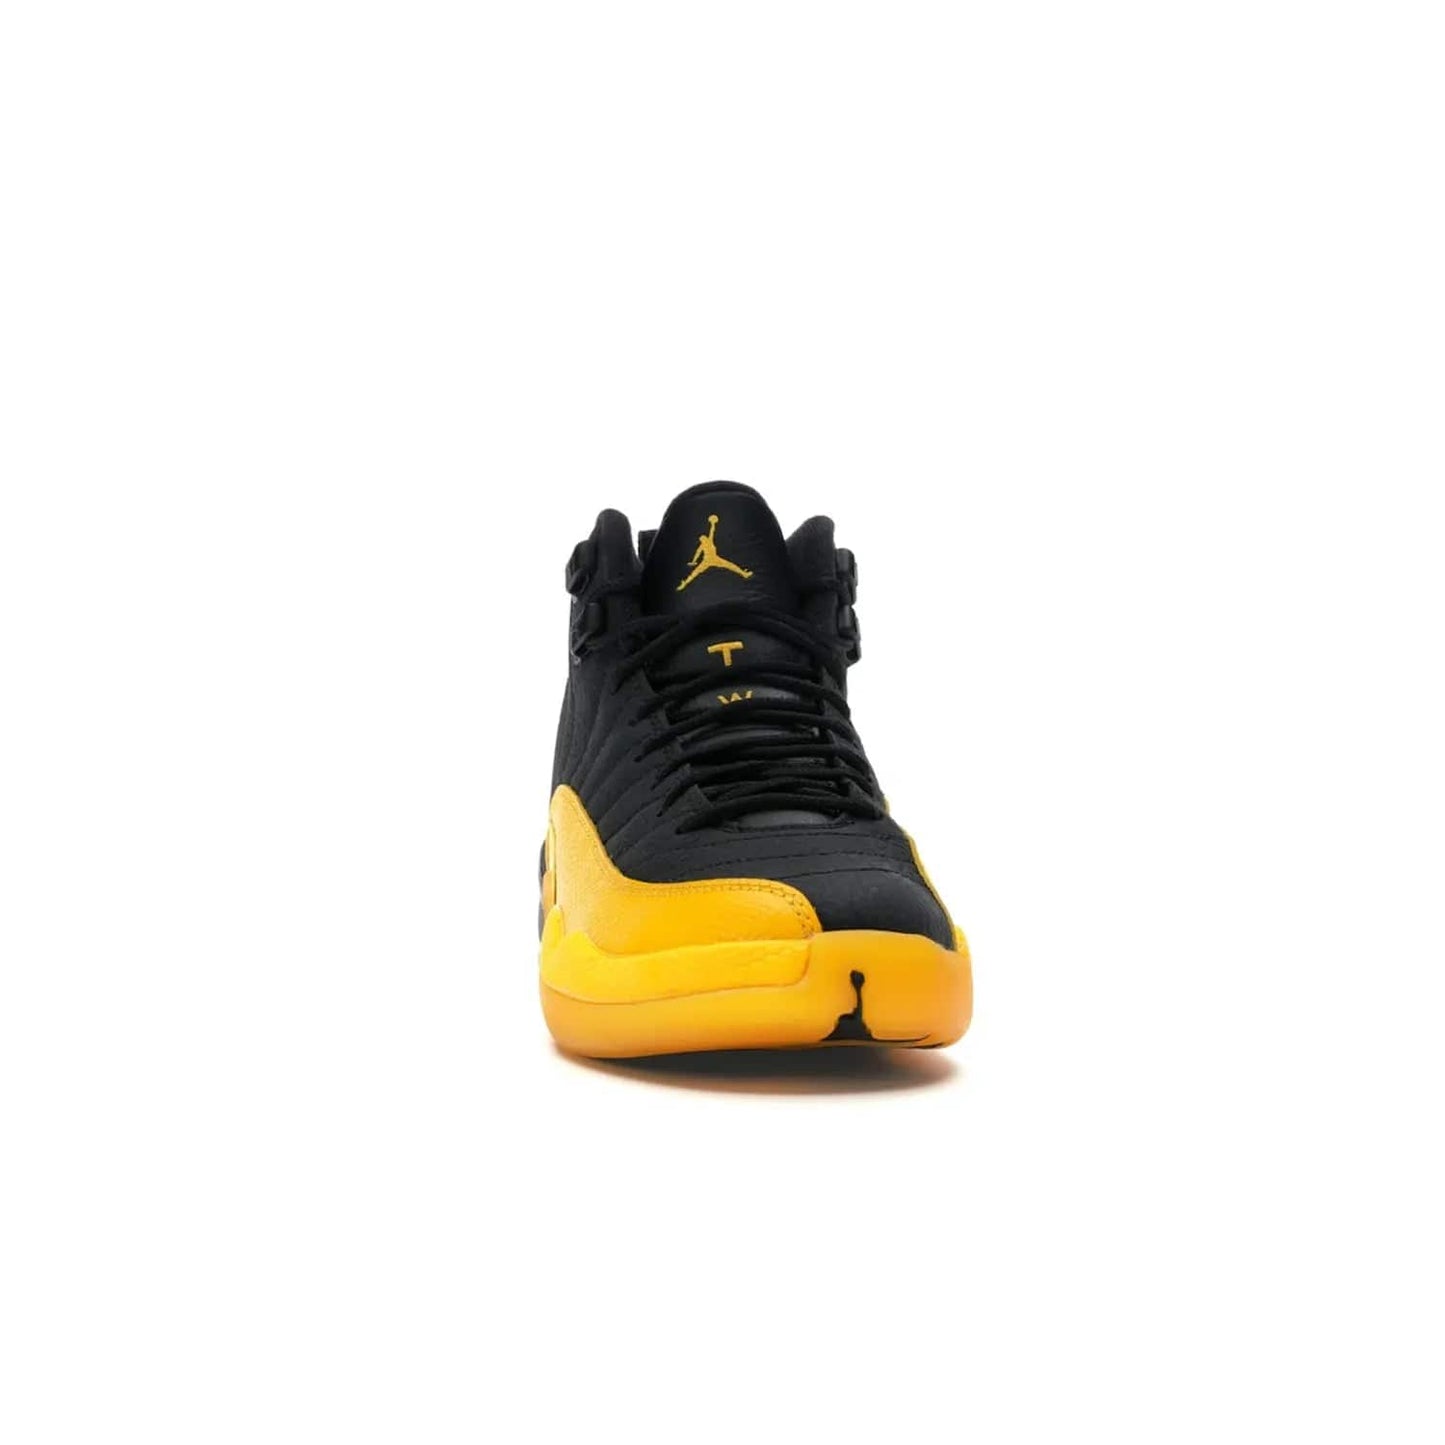 Jordan 12 Retro Black University Gold (GS) - Image 9 - Only at www.BallersClubKickz.com - Upgrade your kid's shoe collection with the Jordan 12 Retro Black University Gold. With classic style, black tumbled leather upper, and University Gold accents, it's a great summer look. Out July 2020.